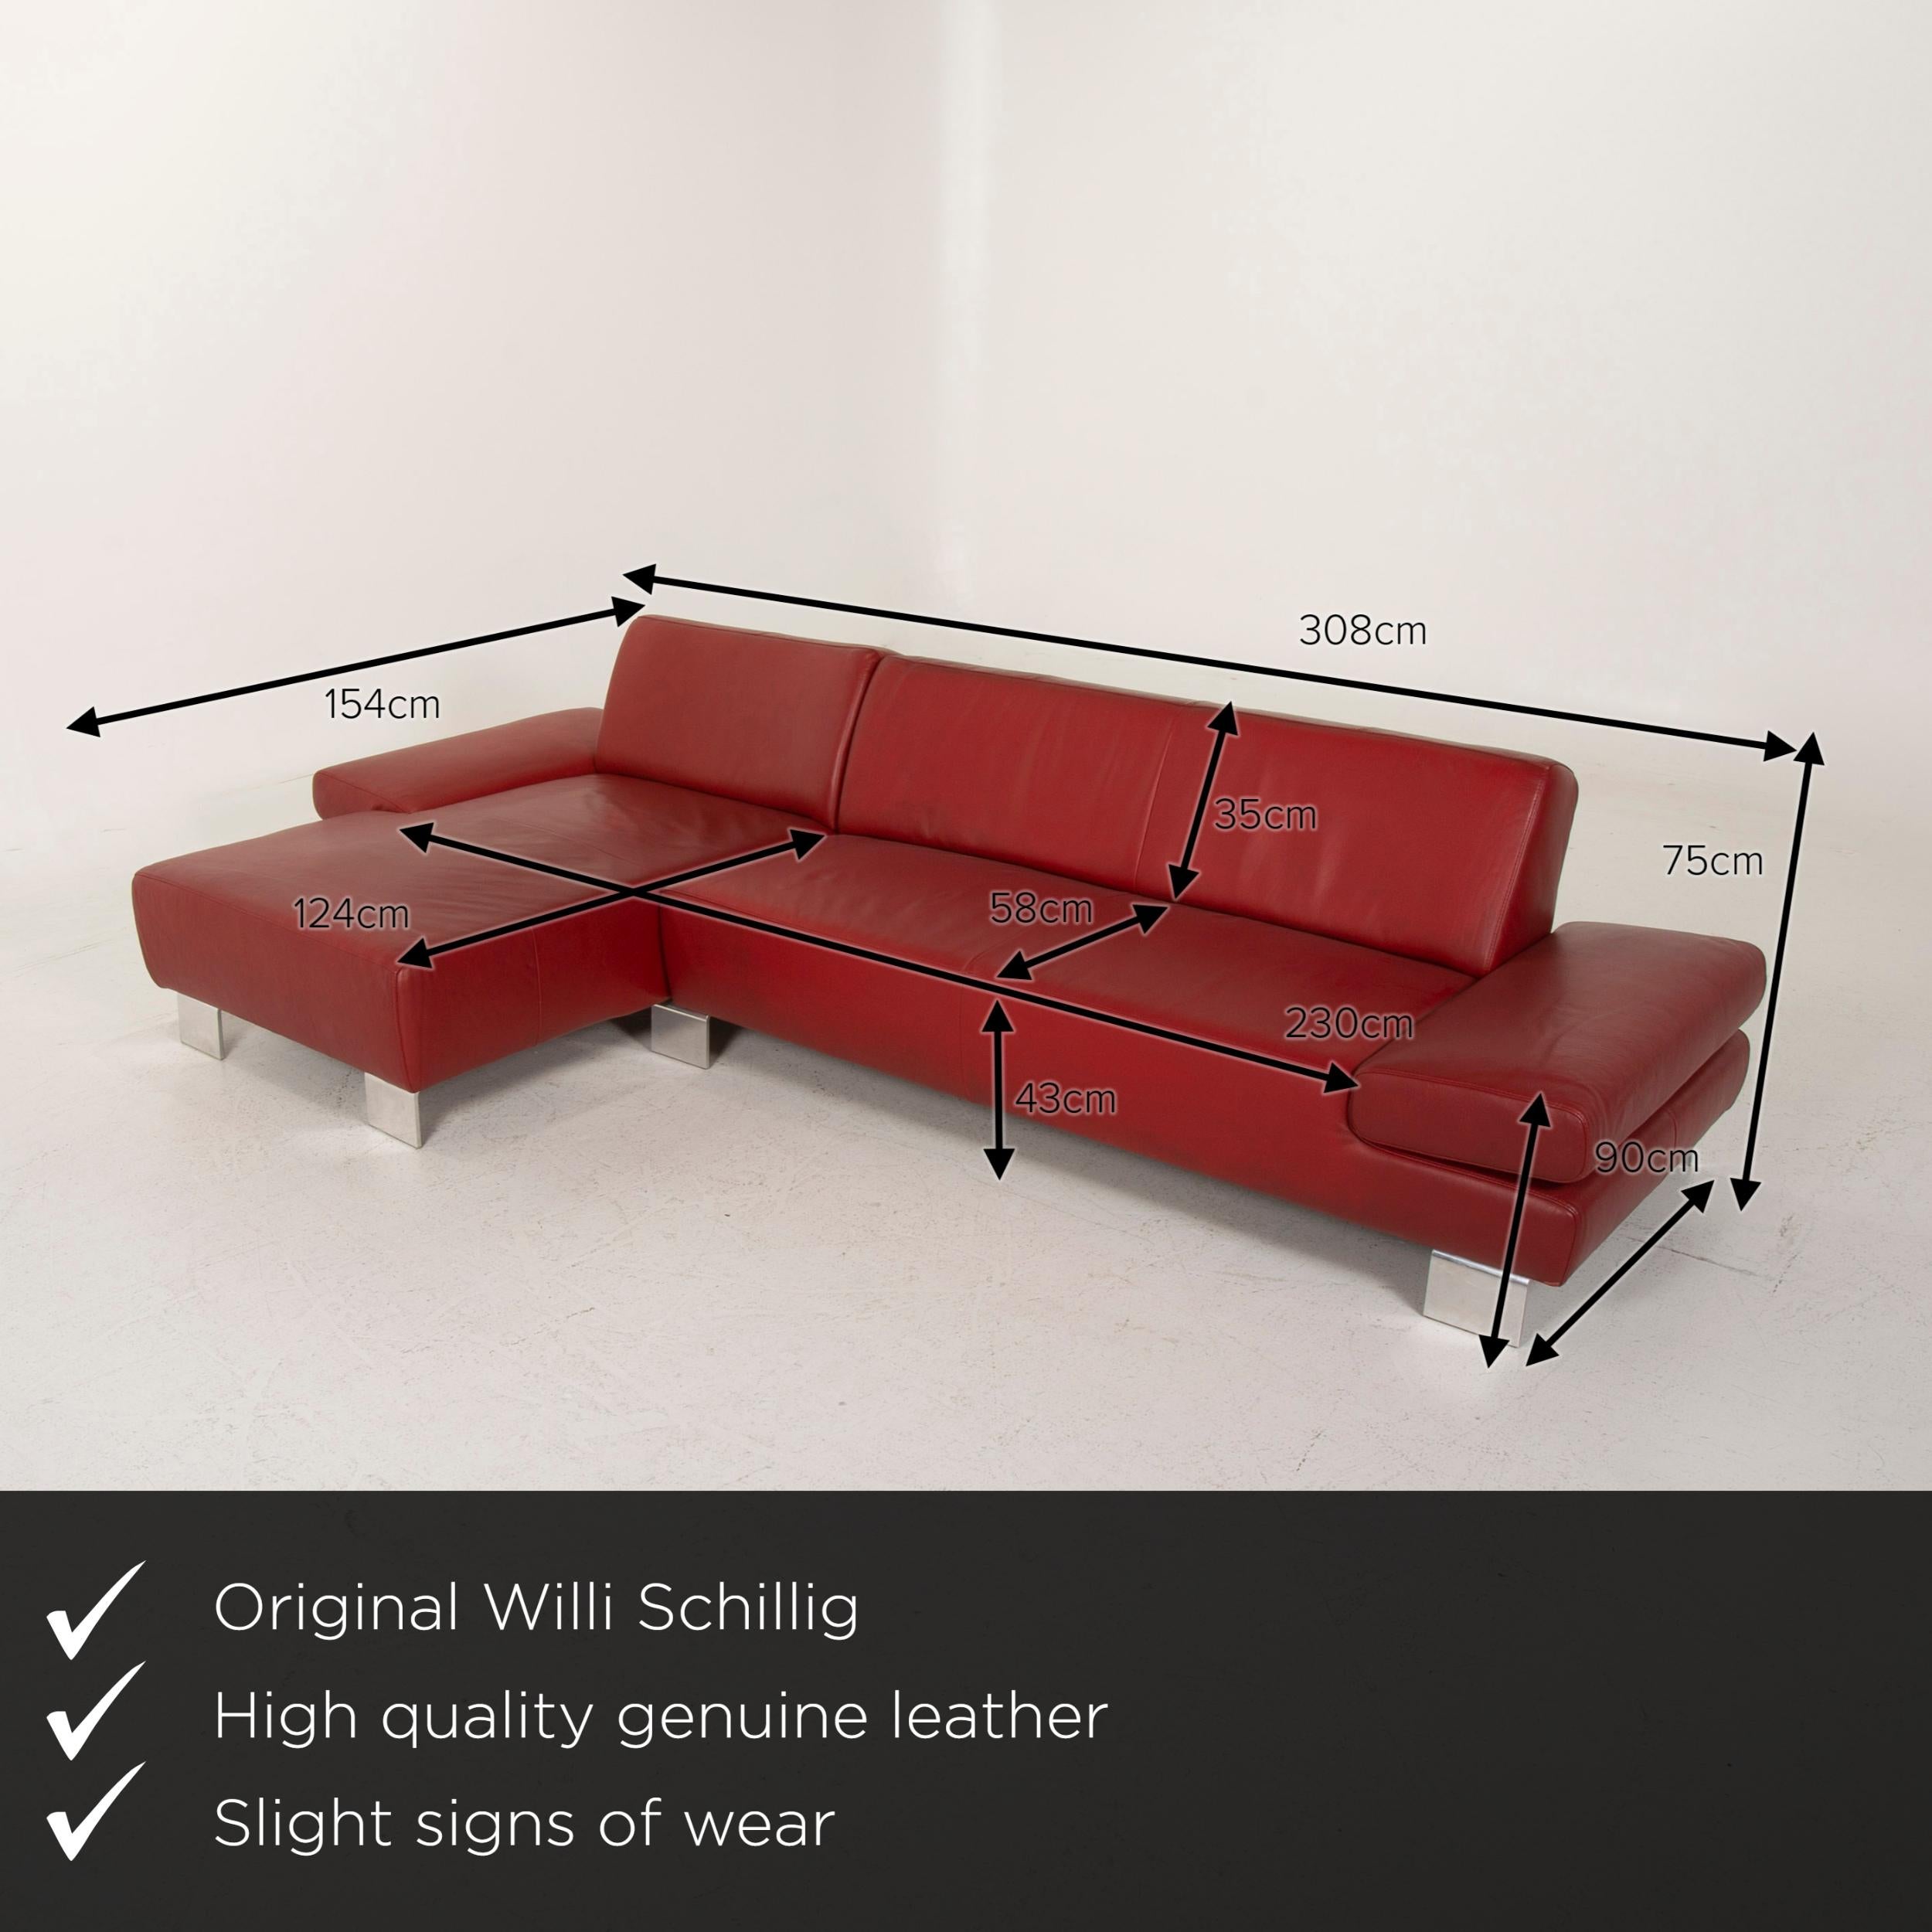 We present to you a Willi Schillig leather sofa red corner sofa.


 Product measurements in centimeters:
 

Depth 154
Width 308
Height 75
Seat height 43
Rest height 48
Seat depth 124
Seat width 230
Back height 35.
 